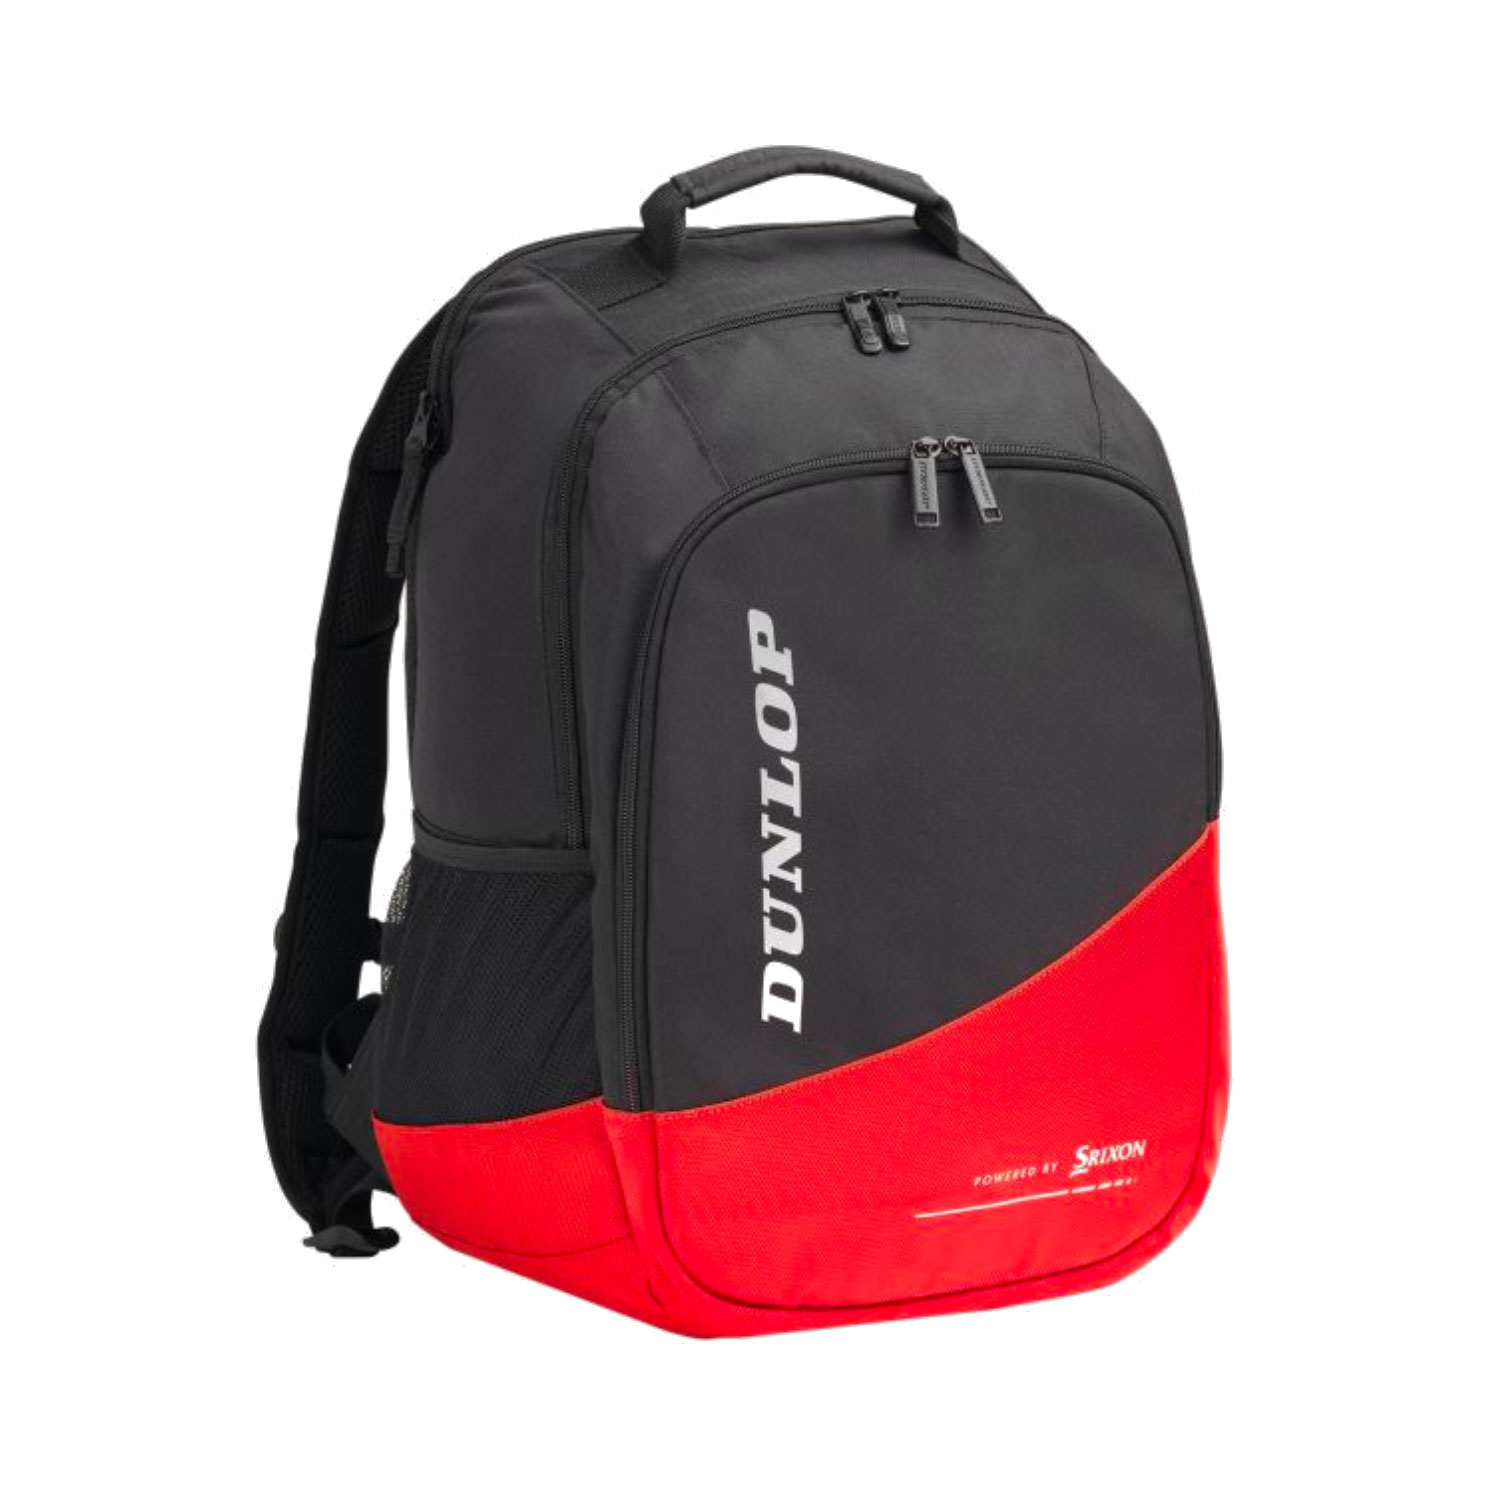 CX PERFORMANCE BACKPACK (BLACK/RED)